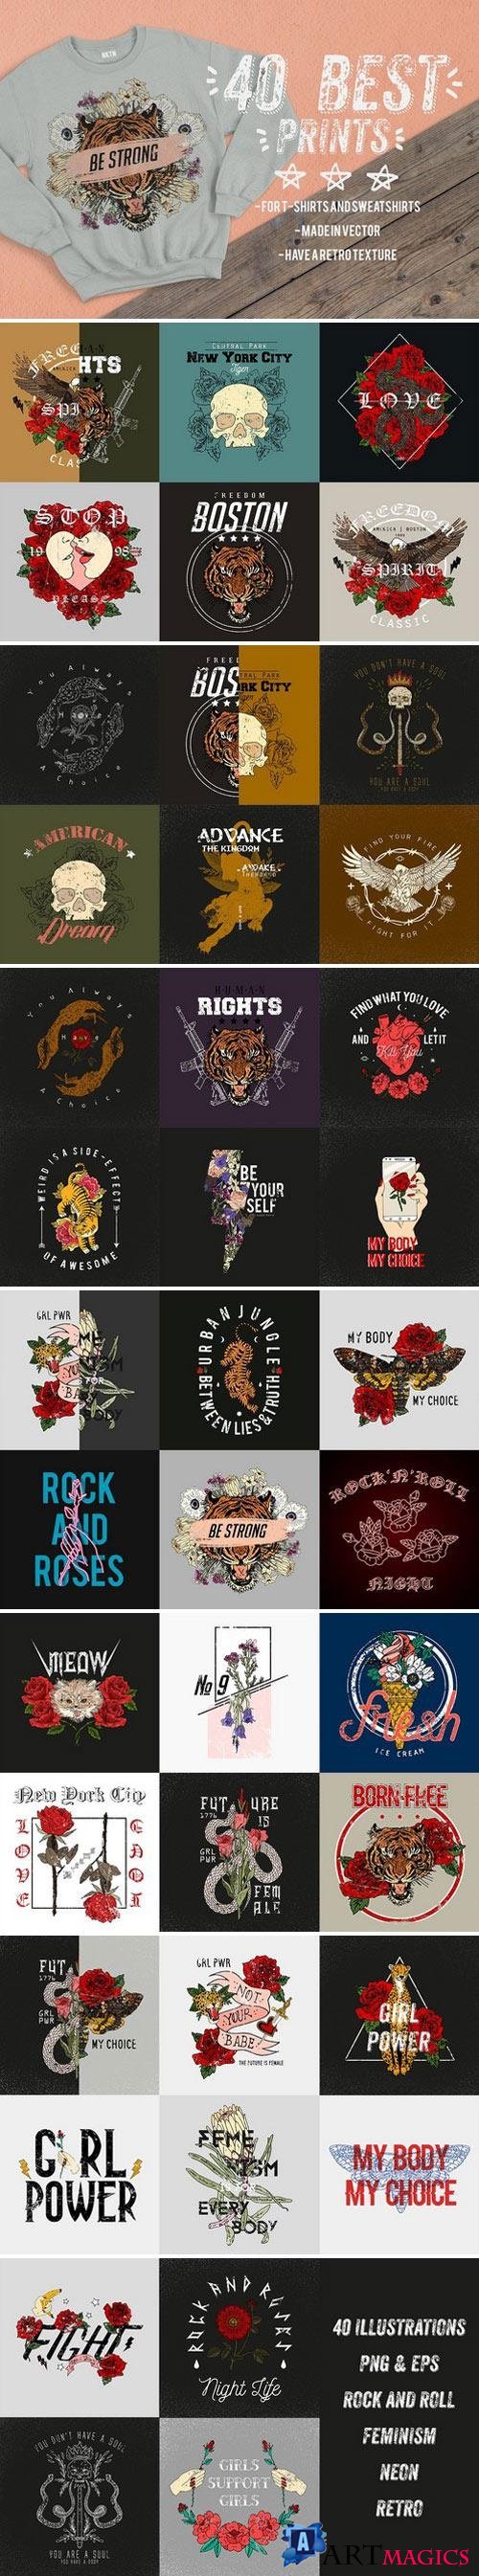 40 best prints for T-shirts 2152931